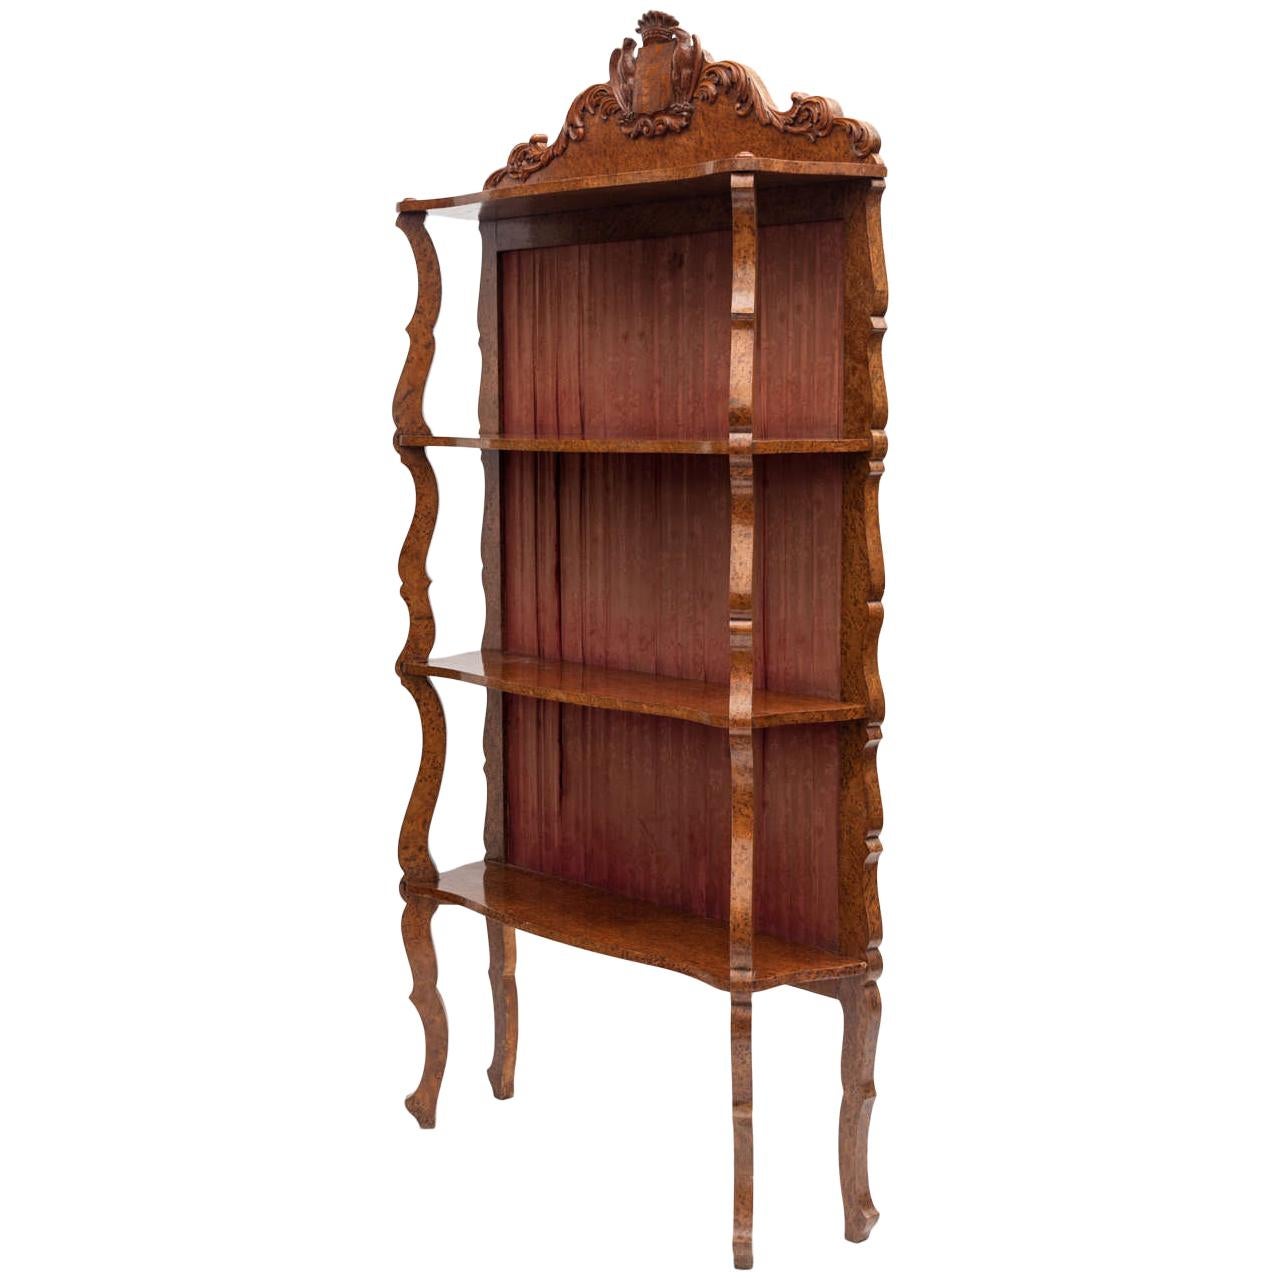 Mid-19th Century Amboyna Etagere or Standing Shelves For Sale